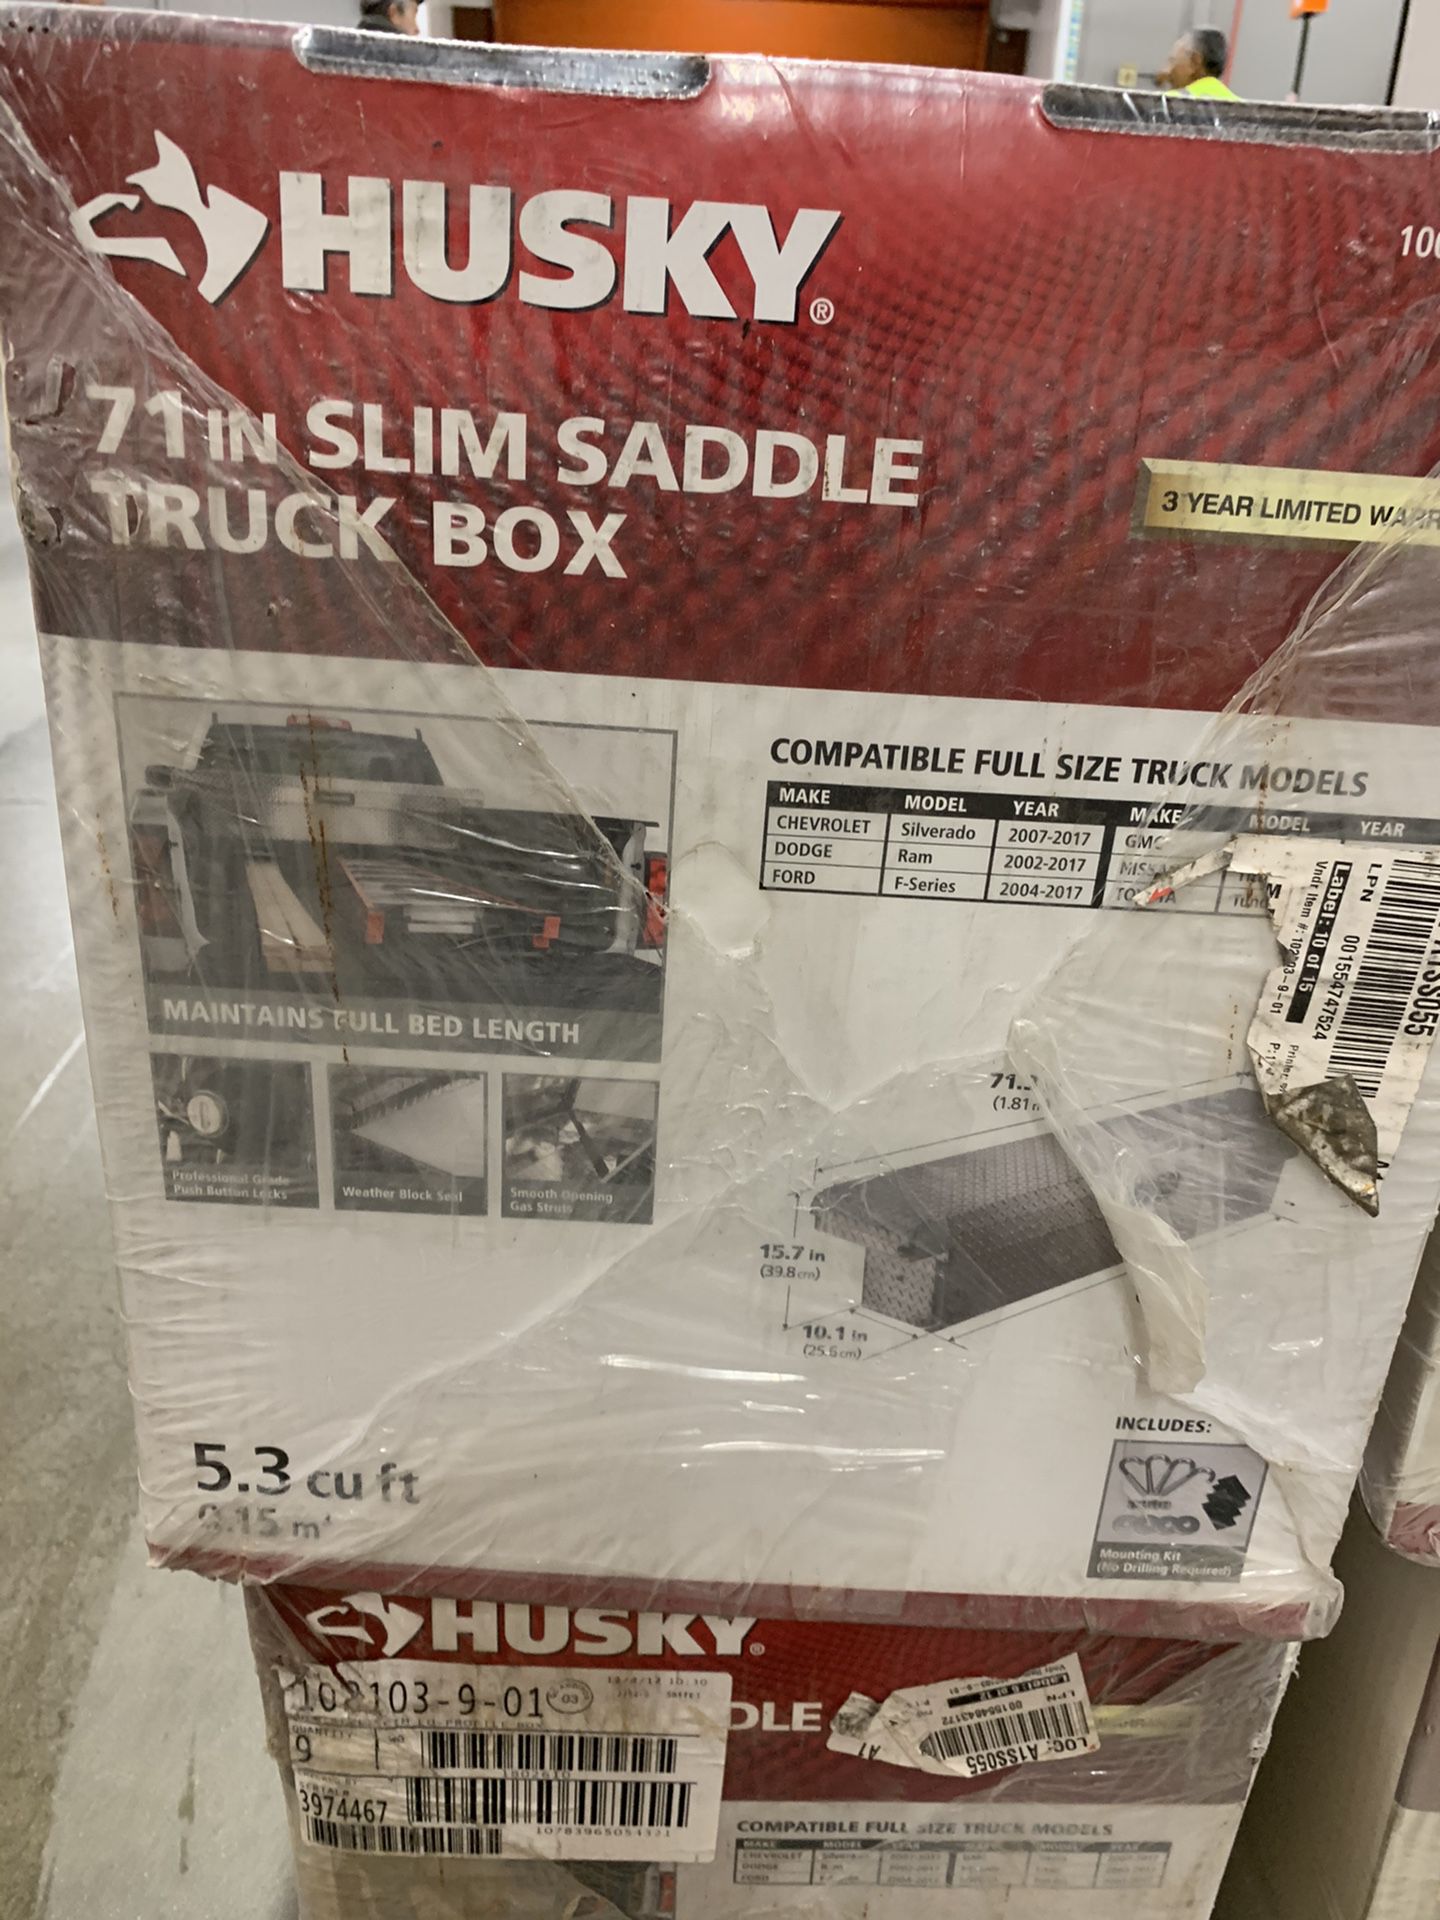 Husky truck tool boxes.